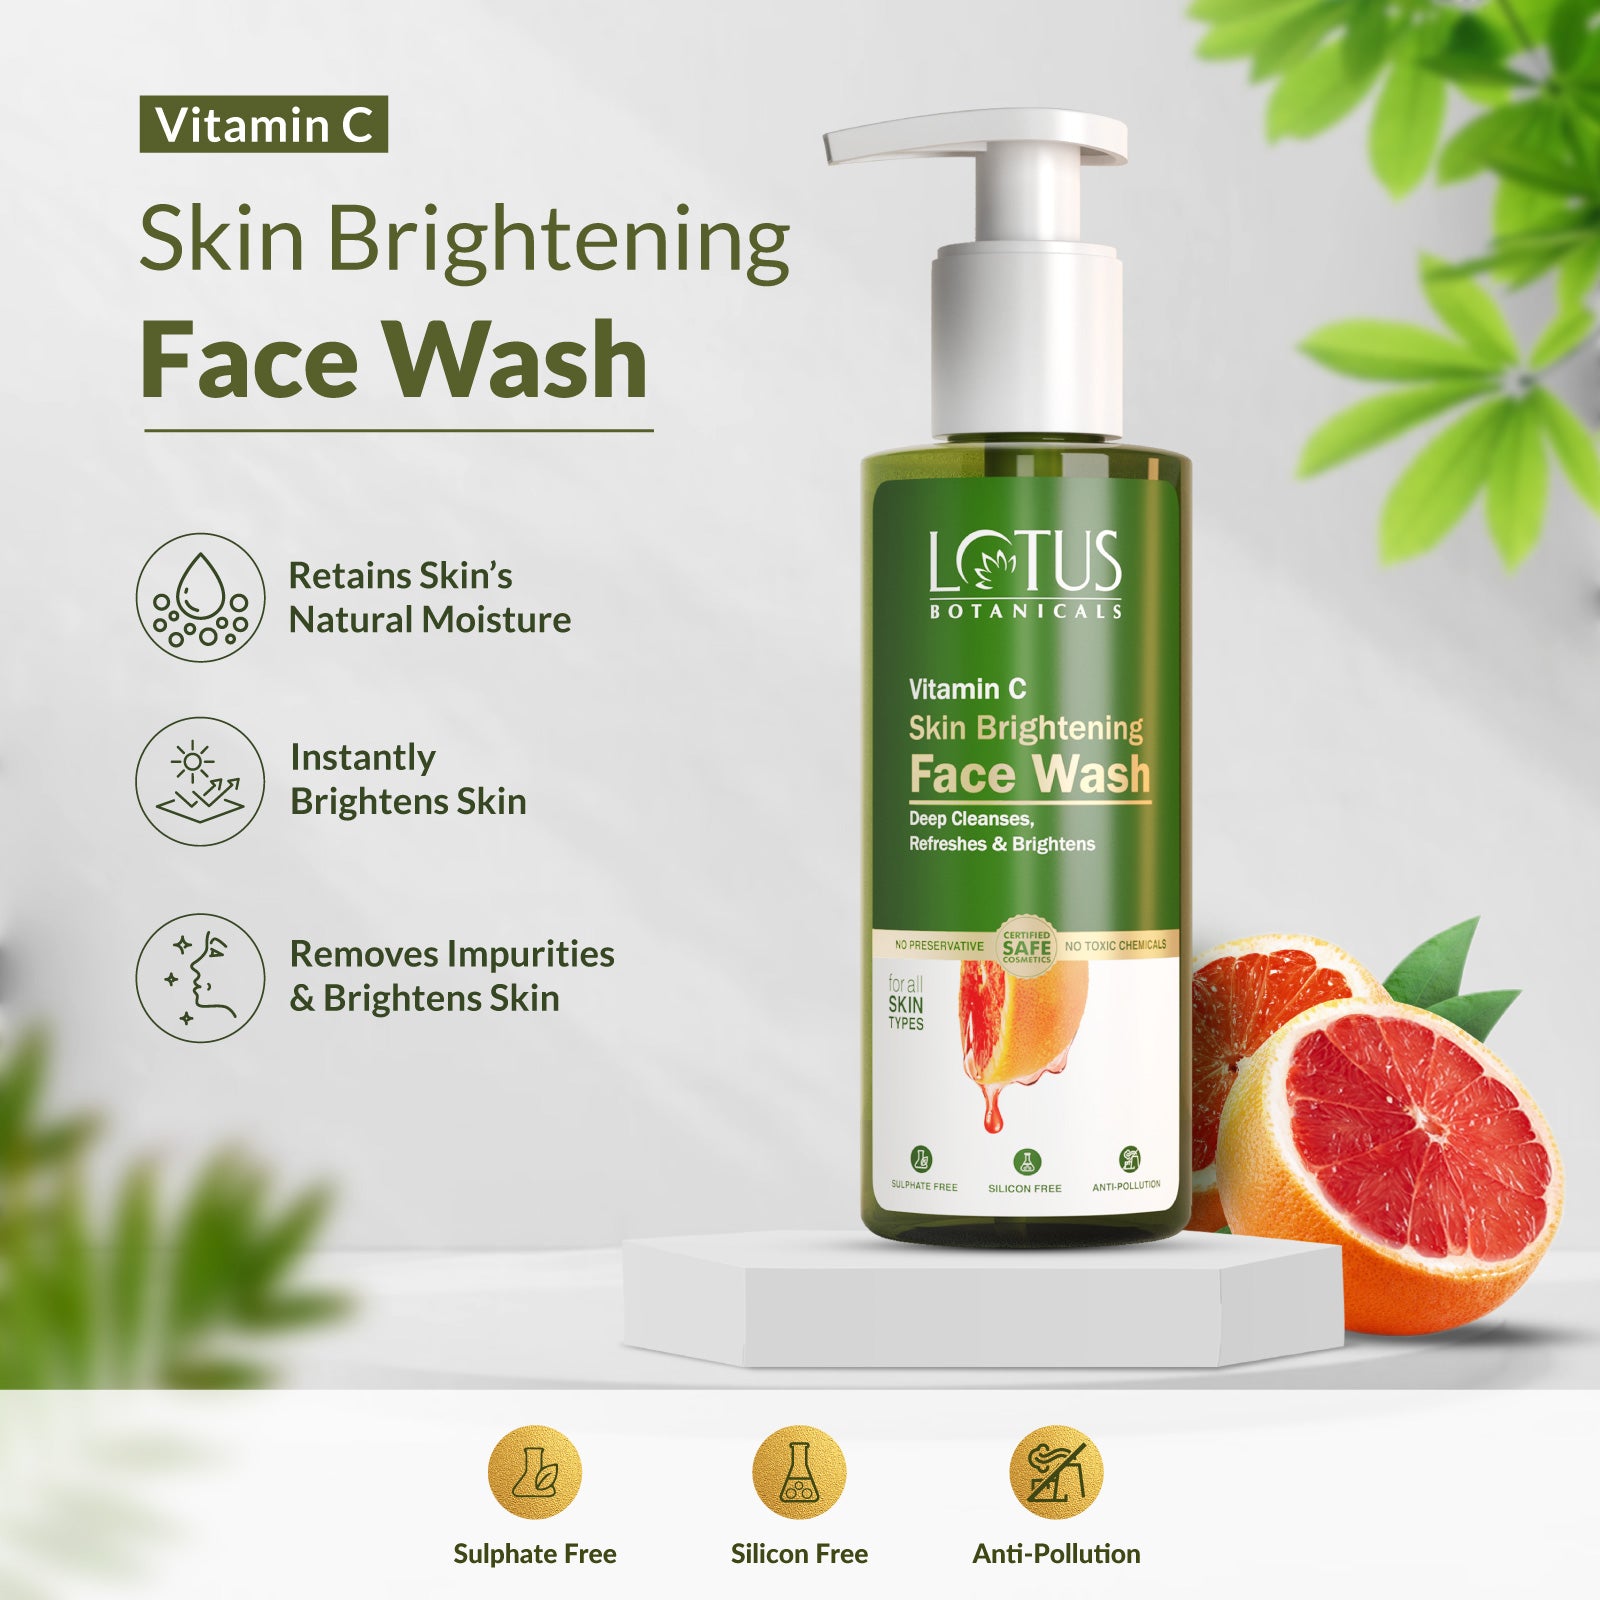 Vitamin C Skin Brightening Combo - Enhance your skin's radiance with this powerful combination of Vitamin C products